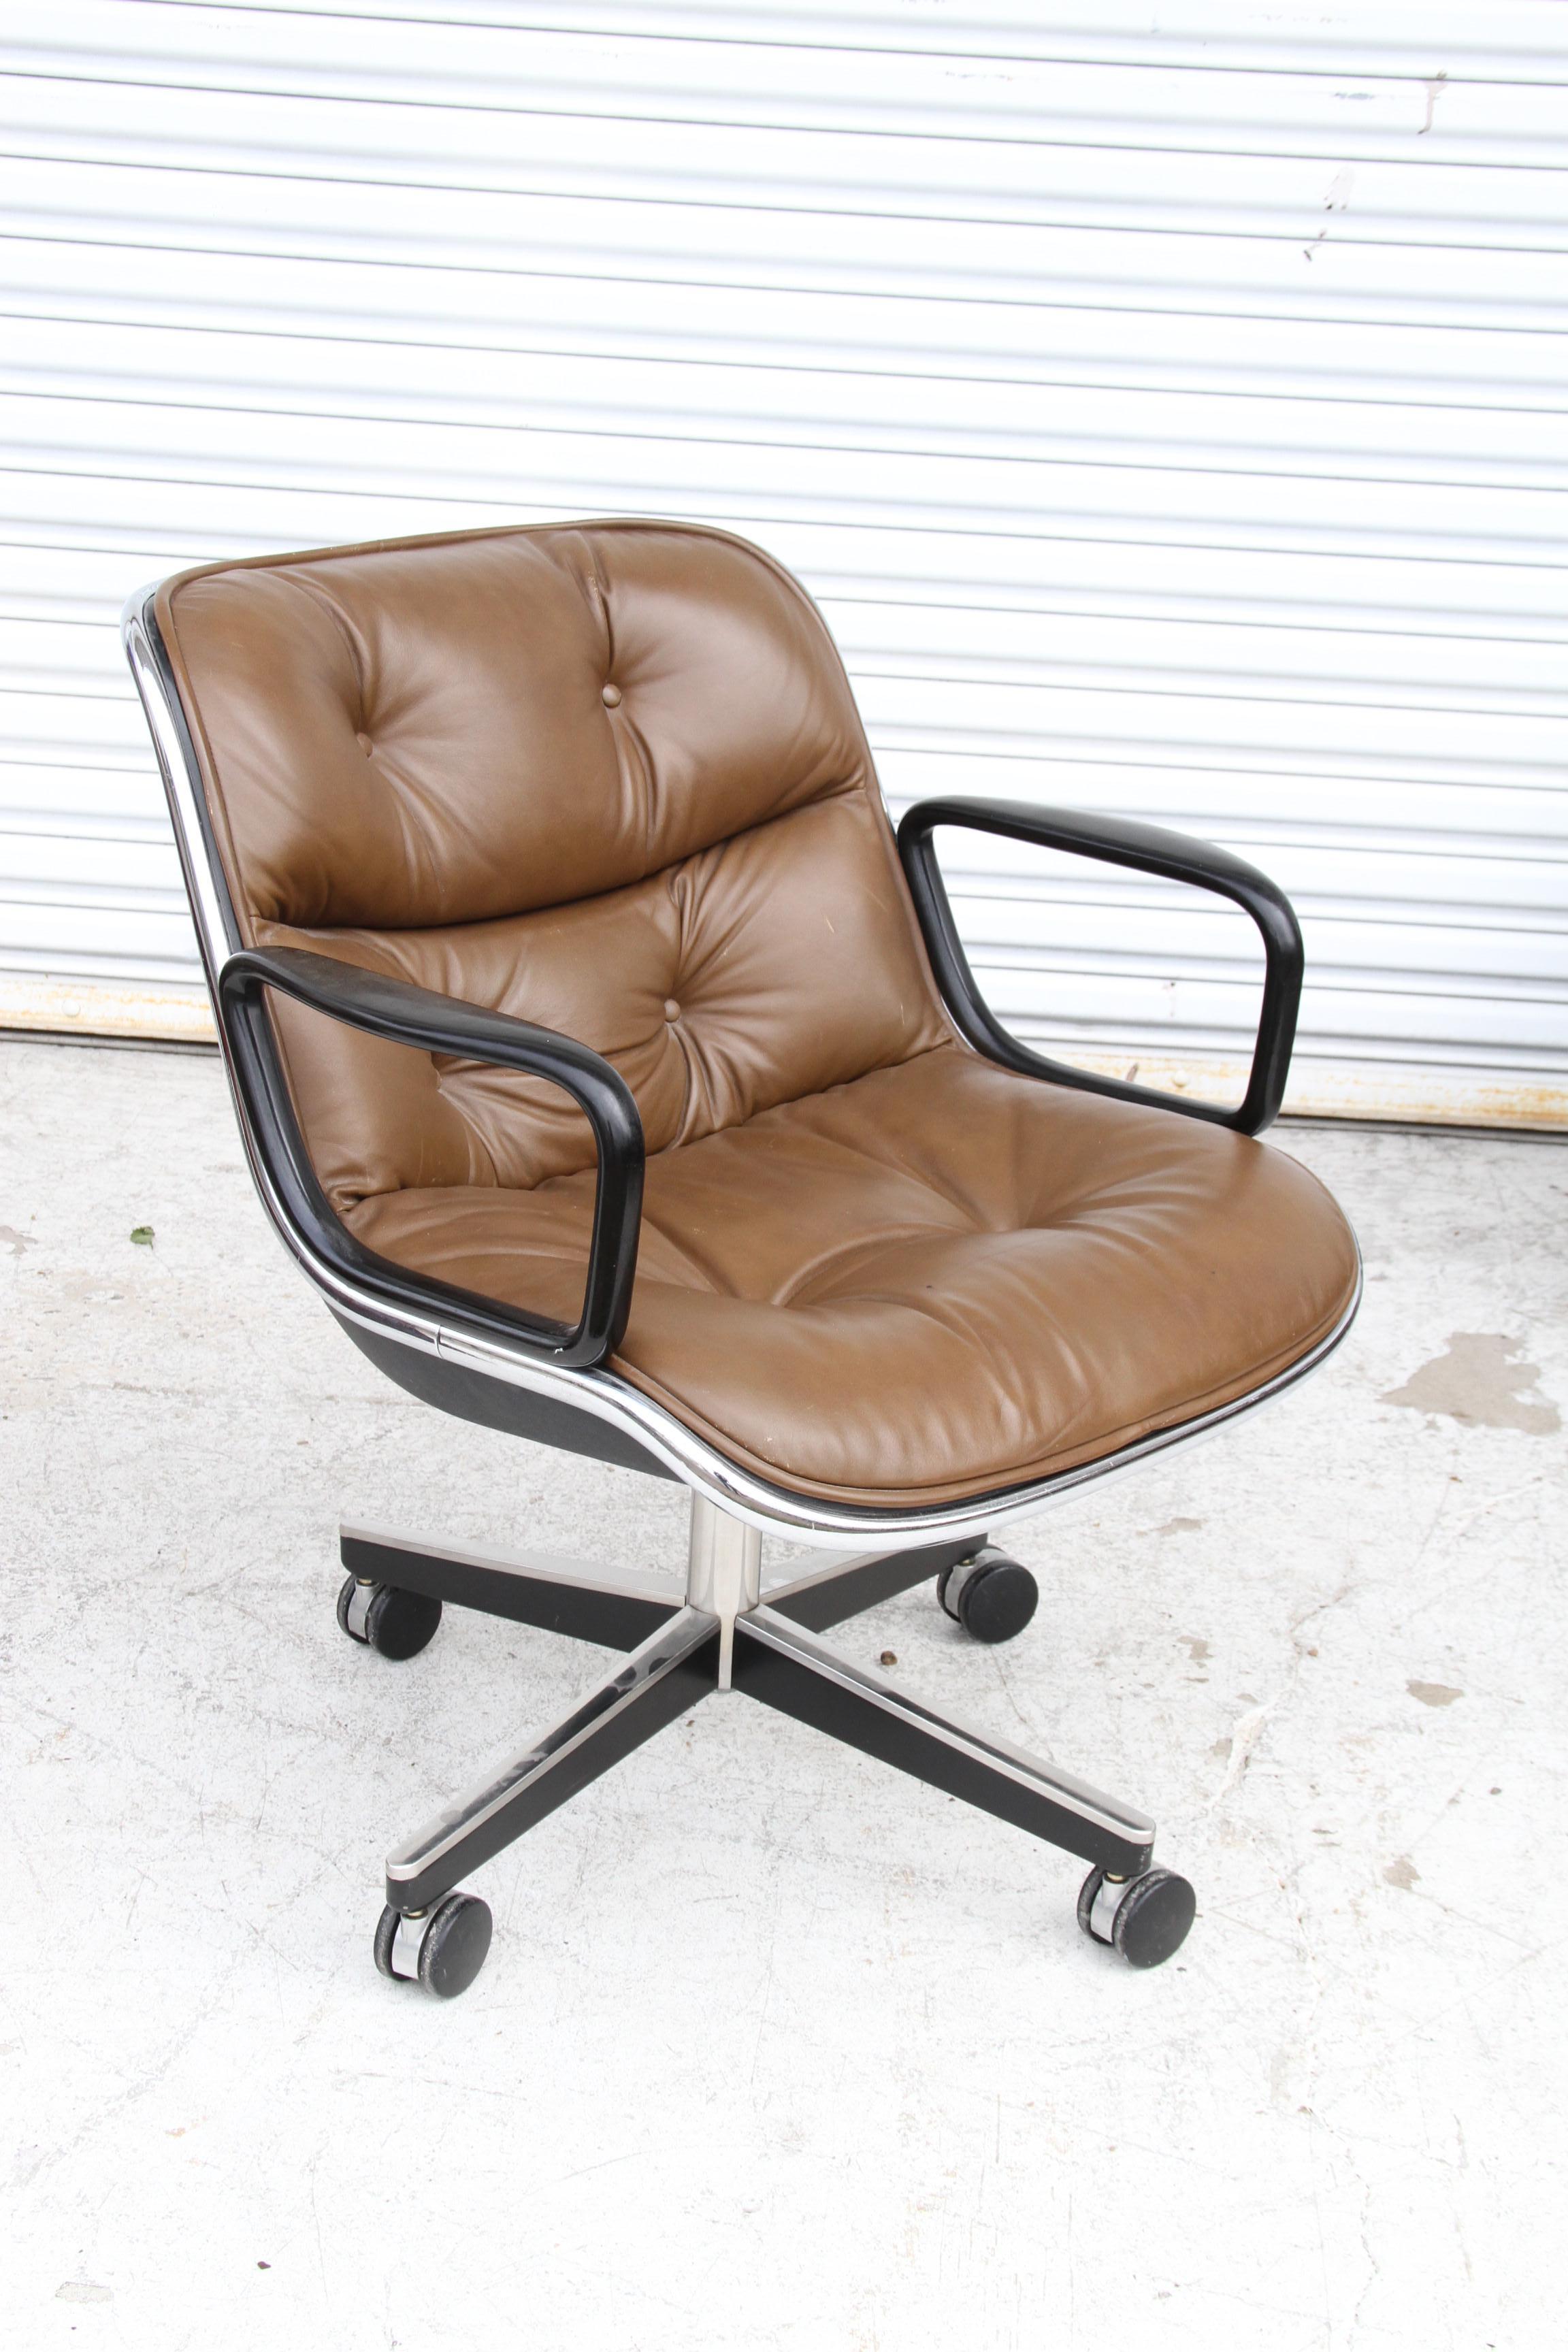 Leather 1 Charles Pollock for Knoll Executive Chairs (4 Available)